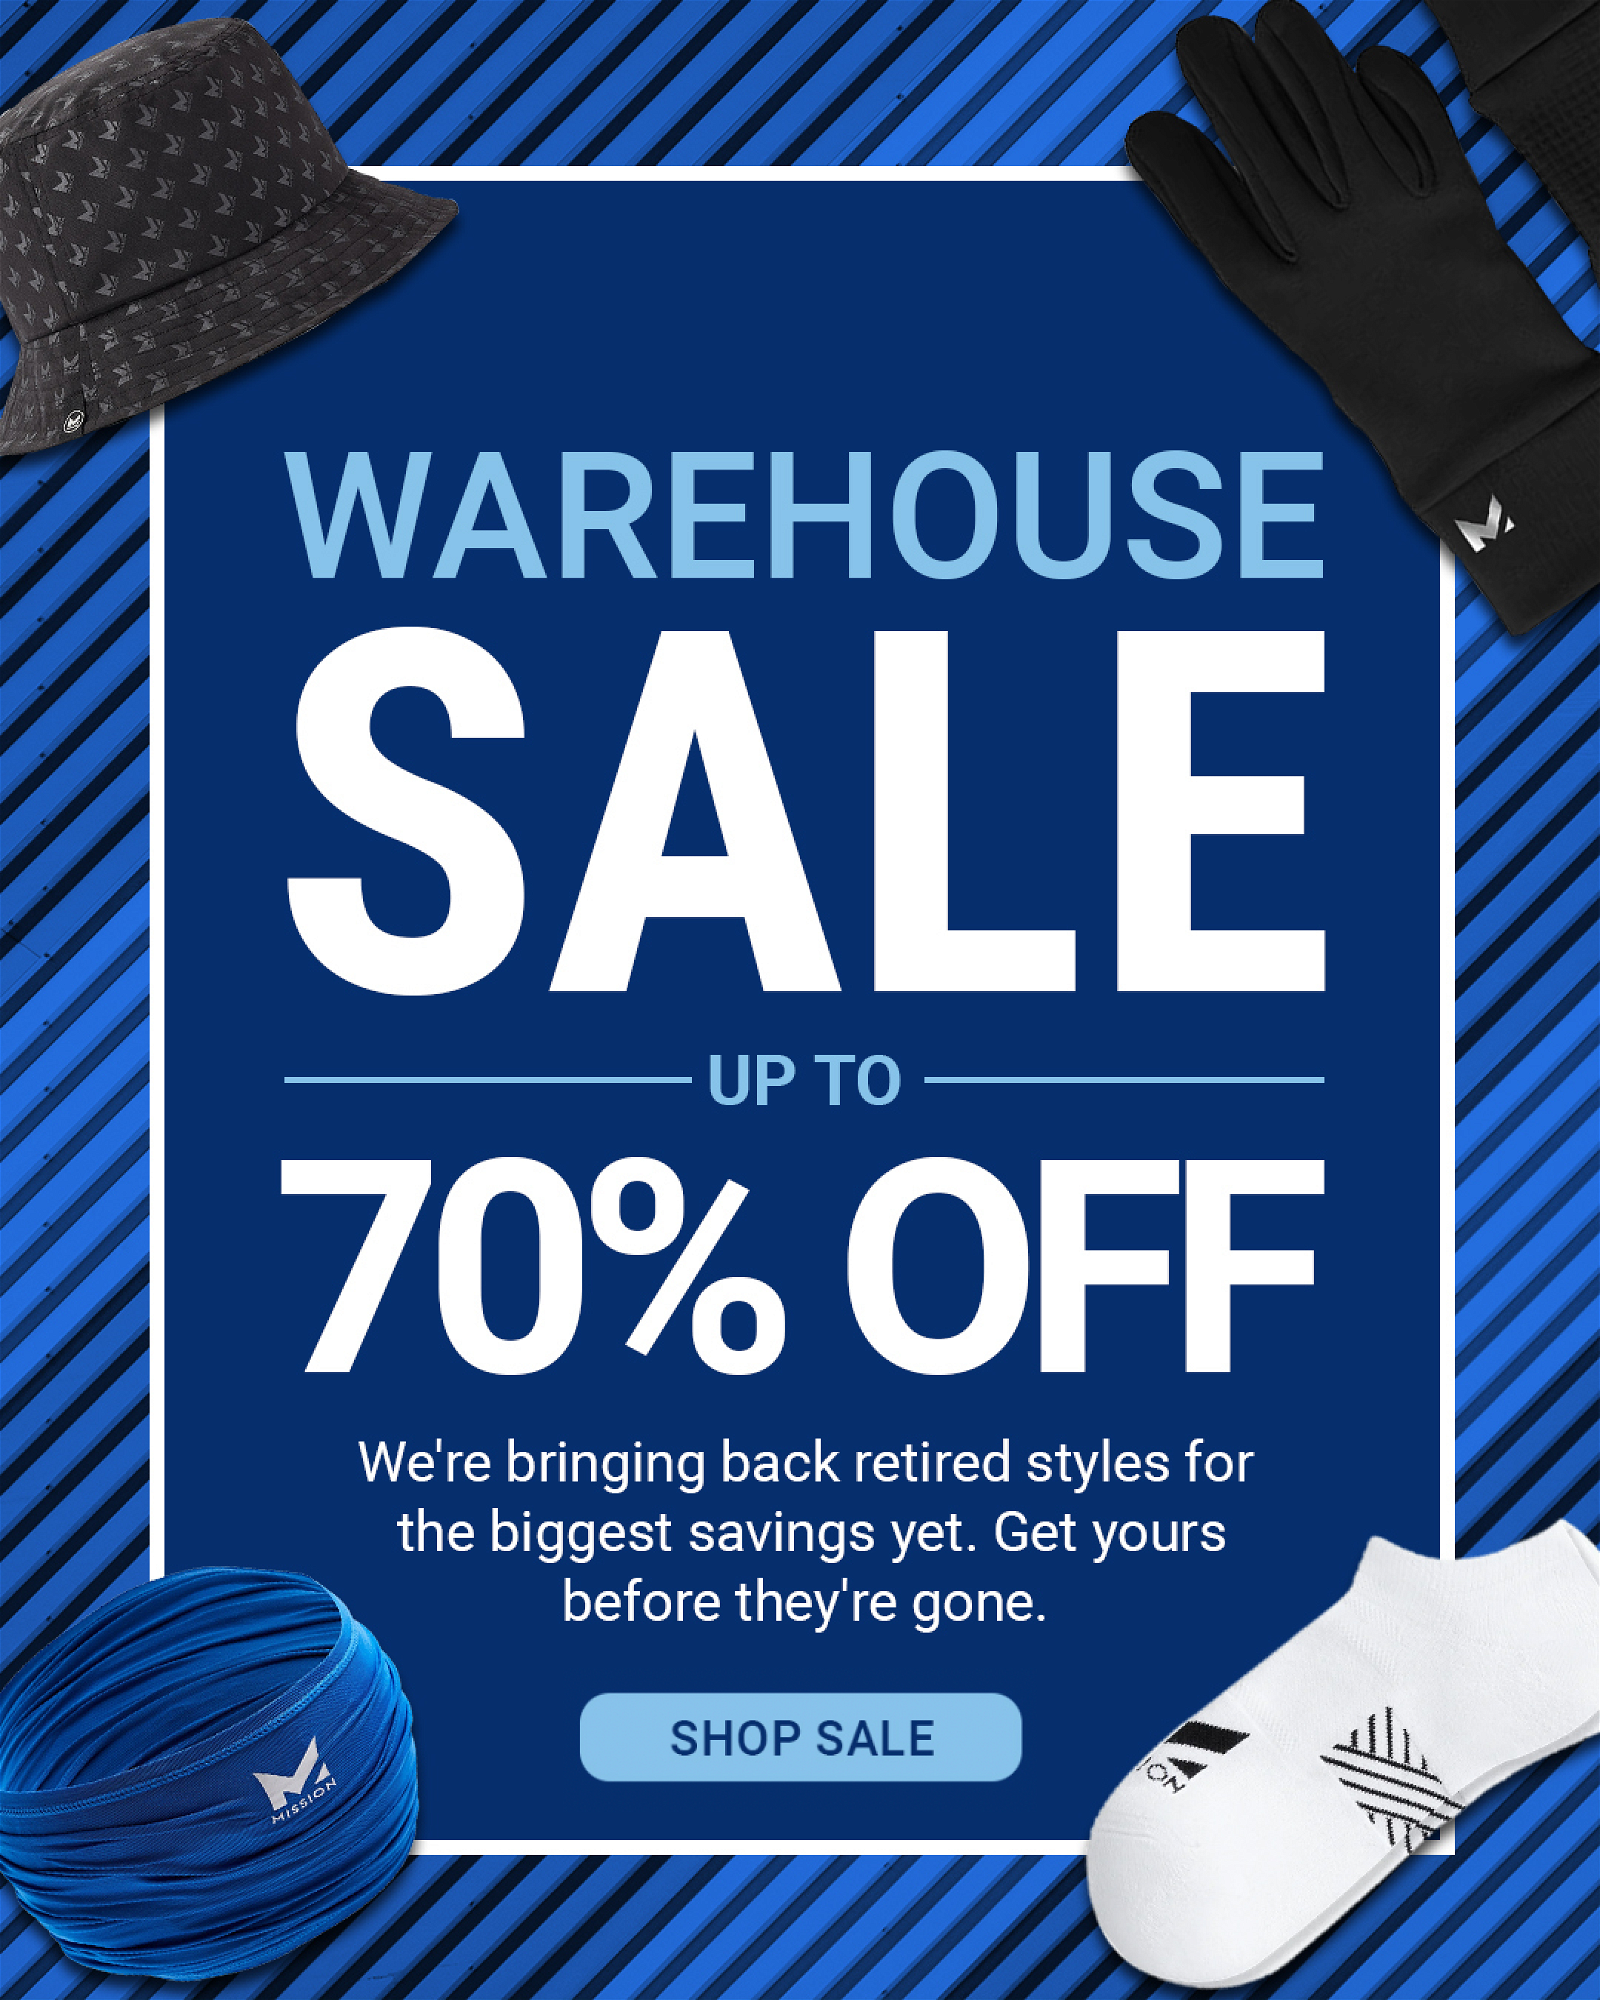 WAREHOUSE SALE UP TO 80% OFF We're bringing back retired styles for the biggest savings yet. Get yours before they're gone. [SHOP SALE]